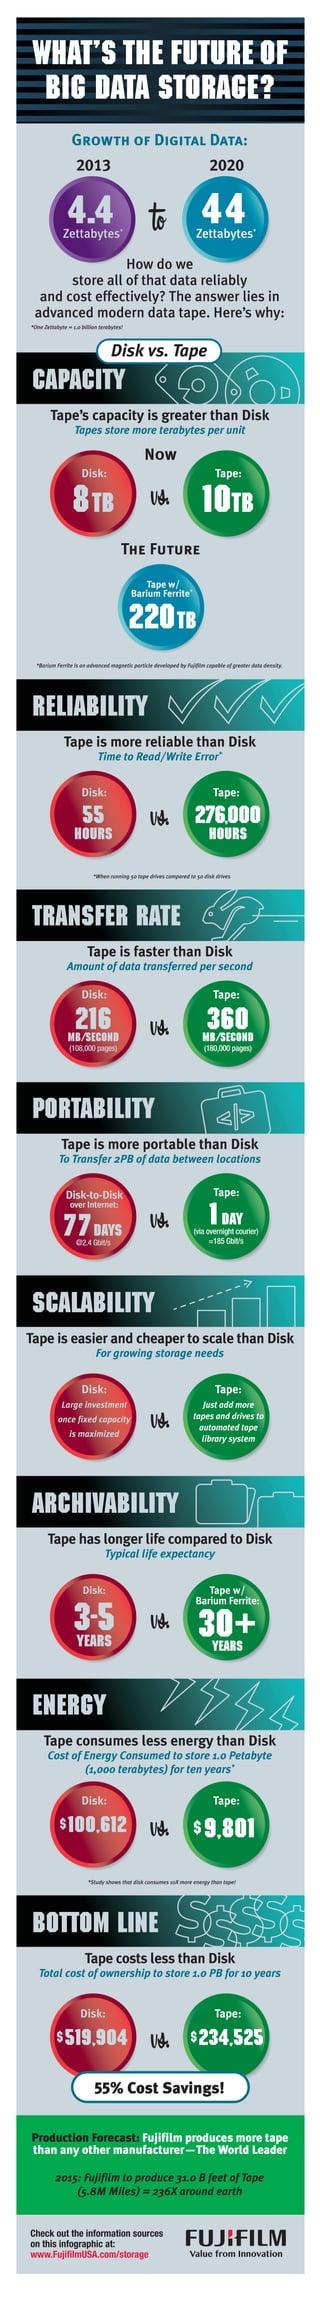 Tape’s capacity is greater than Disk
Tapes store more terabytes per unit
What’s the Future of
Big Data Storage?
How do we
store all of that data reliably
and cost effectively? The answer lies in
advanced modern data tape. Here’s why:
4.4Zettabytes*
44Zettabytes*
to
vs.
Growth of Digital Data:
2013 2020
Now
The Future
*One Zettabyte = 1.0 billion terabytes!
*Barium Ferrite is an advanced magnetic particle developed by Fujifilm capable of greater data density.
*Study shows that disk consumes 10X more energy than tape!
*When running 50 tape drives compared to 50 disk drives
8TB
Disk:
10TB
Tape:
220TB
Tape w/
Barium Ferrite*
Capacity
Tape is easier and cheaper to scale than Disk
For growing storage needs
vs.
Disk:
Large investment
once fixed capacity
is maximized
Tape:
Just add more
tapes and drives to
automated tape
library system
SCALABILITY
Tape has longer life compared to Disk
Typical life expectancy
vs.
Disk:
3-5years
Tape w/
Barium Ferrite:
3o+years
ARCHIVABILITY
Tape costs less than Disk
Total cost of ownership to store 1.0 PB for 10 years
vs.
BOTTOM LINE
Tape is more reliable than Disk
Time to Read/Write Error*
vs.55
hours
Disk:
276,000
hours
Tape:
Reliability
Tape is faster than Disk
Amount of data transferred per second
vs.216MB/second
(108,000 pages)
Disk:
360MB/second
(180,000 pages)
Tape:
TRANSFER RATE
Tape consumes less energy than Disk
Cost of Energy Consumed to store 1.0 Petabyte
(1,000 terabytes) for ten years*
vs.
$519,904
Disk:
$234,525
Tape:
$100,612
Disk:
$ 9,801
Tape:
Energy
Tape is more portable than Disk
To Transfer 2PB of data between locations
vs.77days
@2.4 Gbit/s
Disk-to-Disk
over Internet:
PORTABILITY
Check out the information sources
on this infographic at:
www.FujifilmUSA.com/storage
1day
(via overnight courier)
=185 Gbit/s
Tape:
55% Cost Savings!
Production Forecast: Fujifilm produces more tape
than any other manufacturer—The World Leader
2015: Fujifilm to produce 31.0 B feet of Tape
(5.8M Miles) = 236X around earth
Disk vs. Tape
 